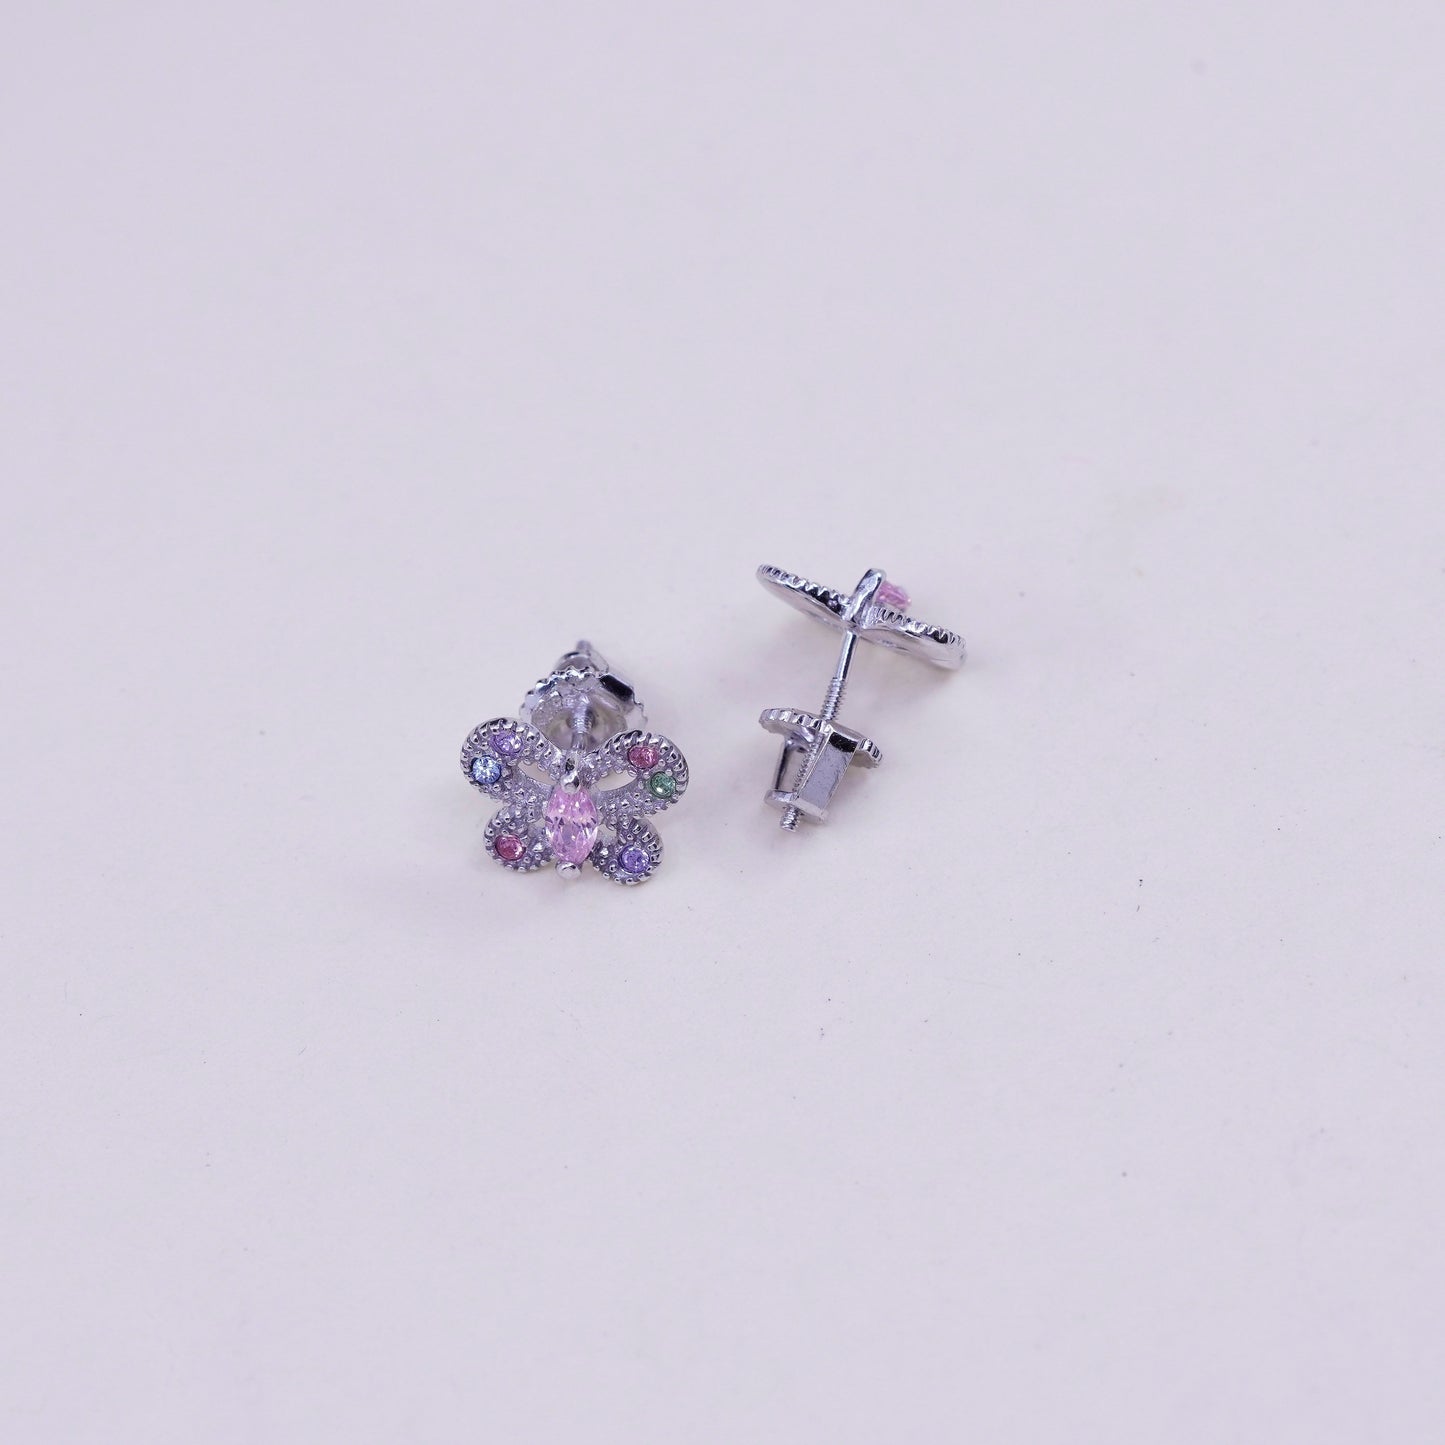 Vintage sterling silver earrings, 925 butterfly studs with pink quartz